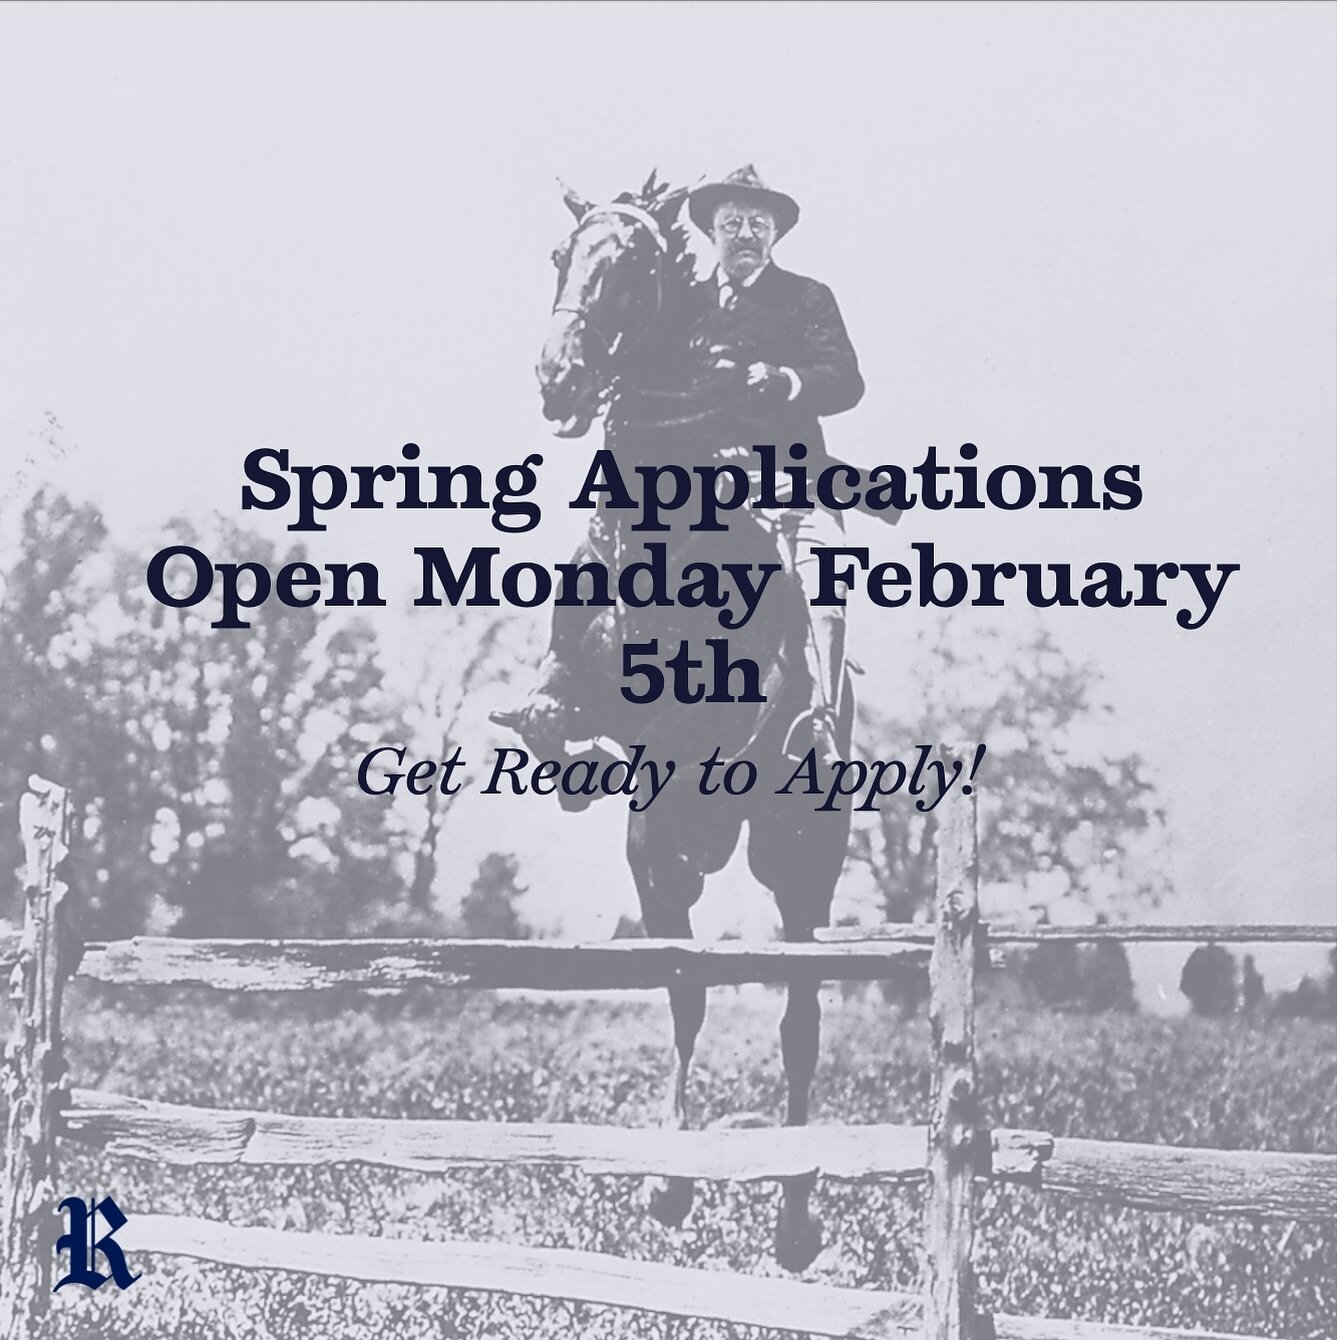 Applications coming out at the beginning of this upcoming week.

We look forward to learning about all the applicants!